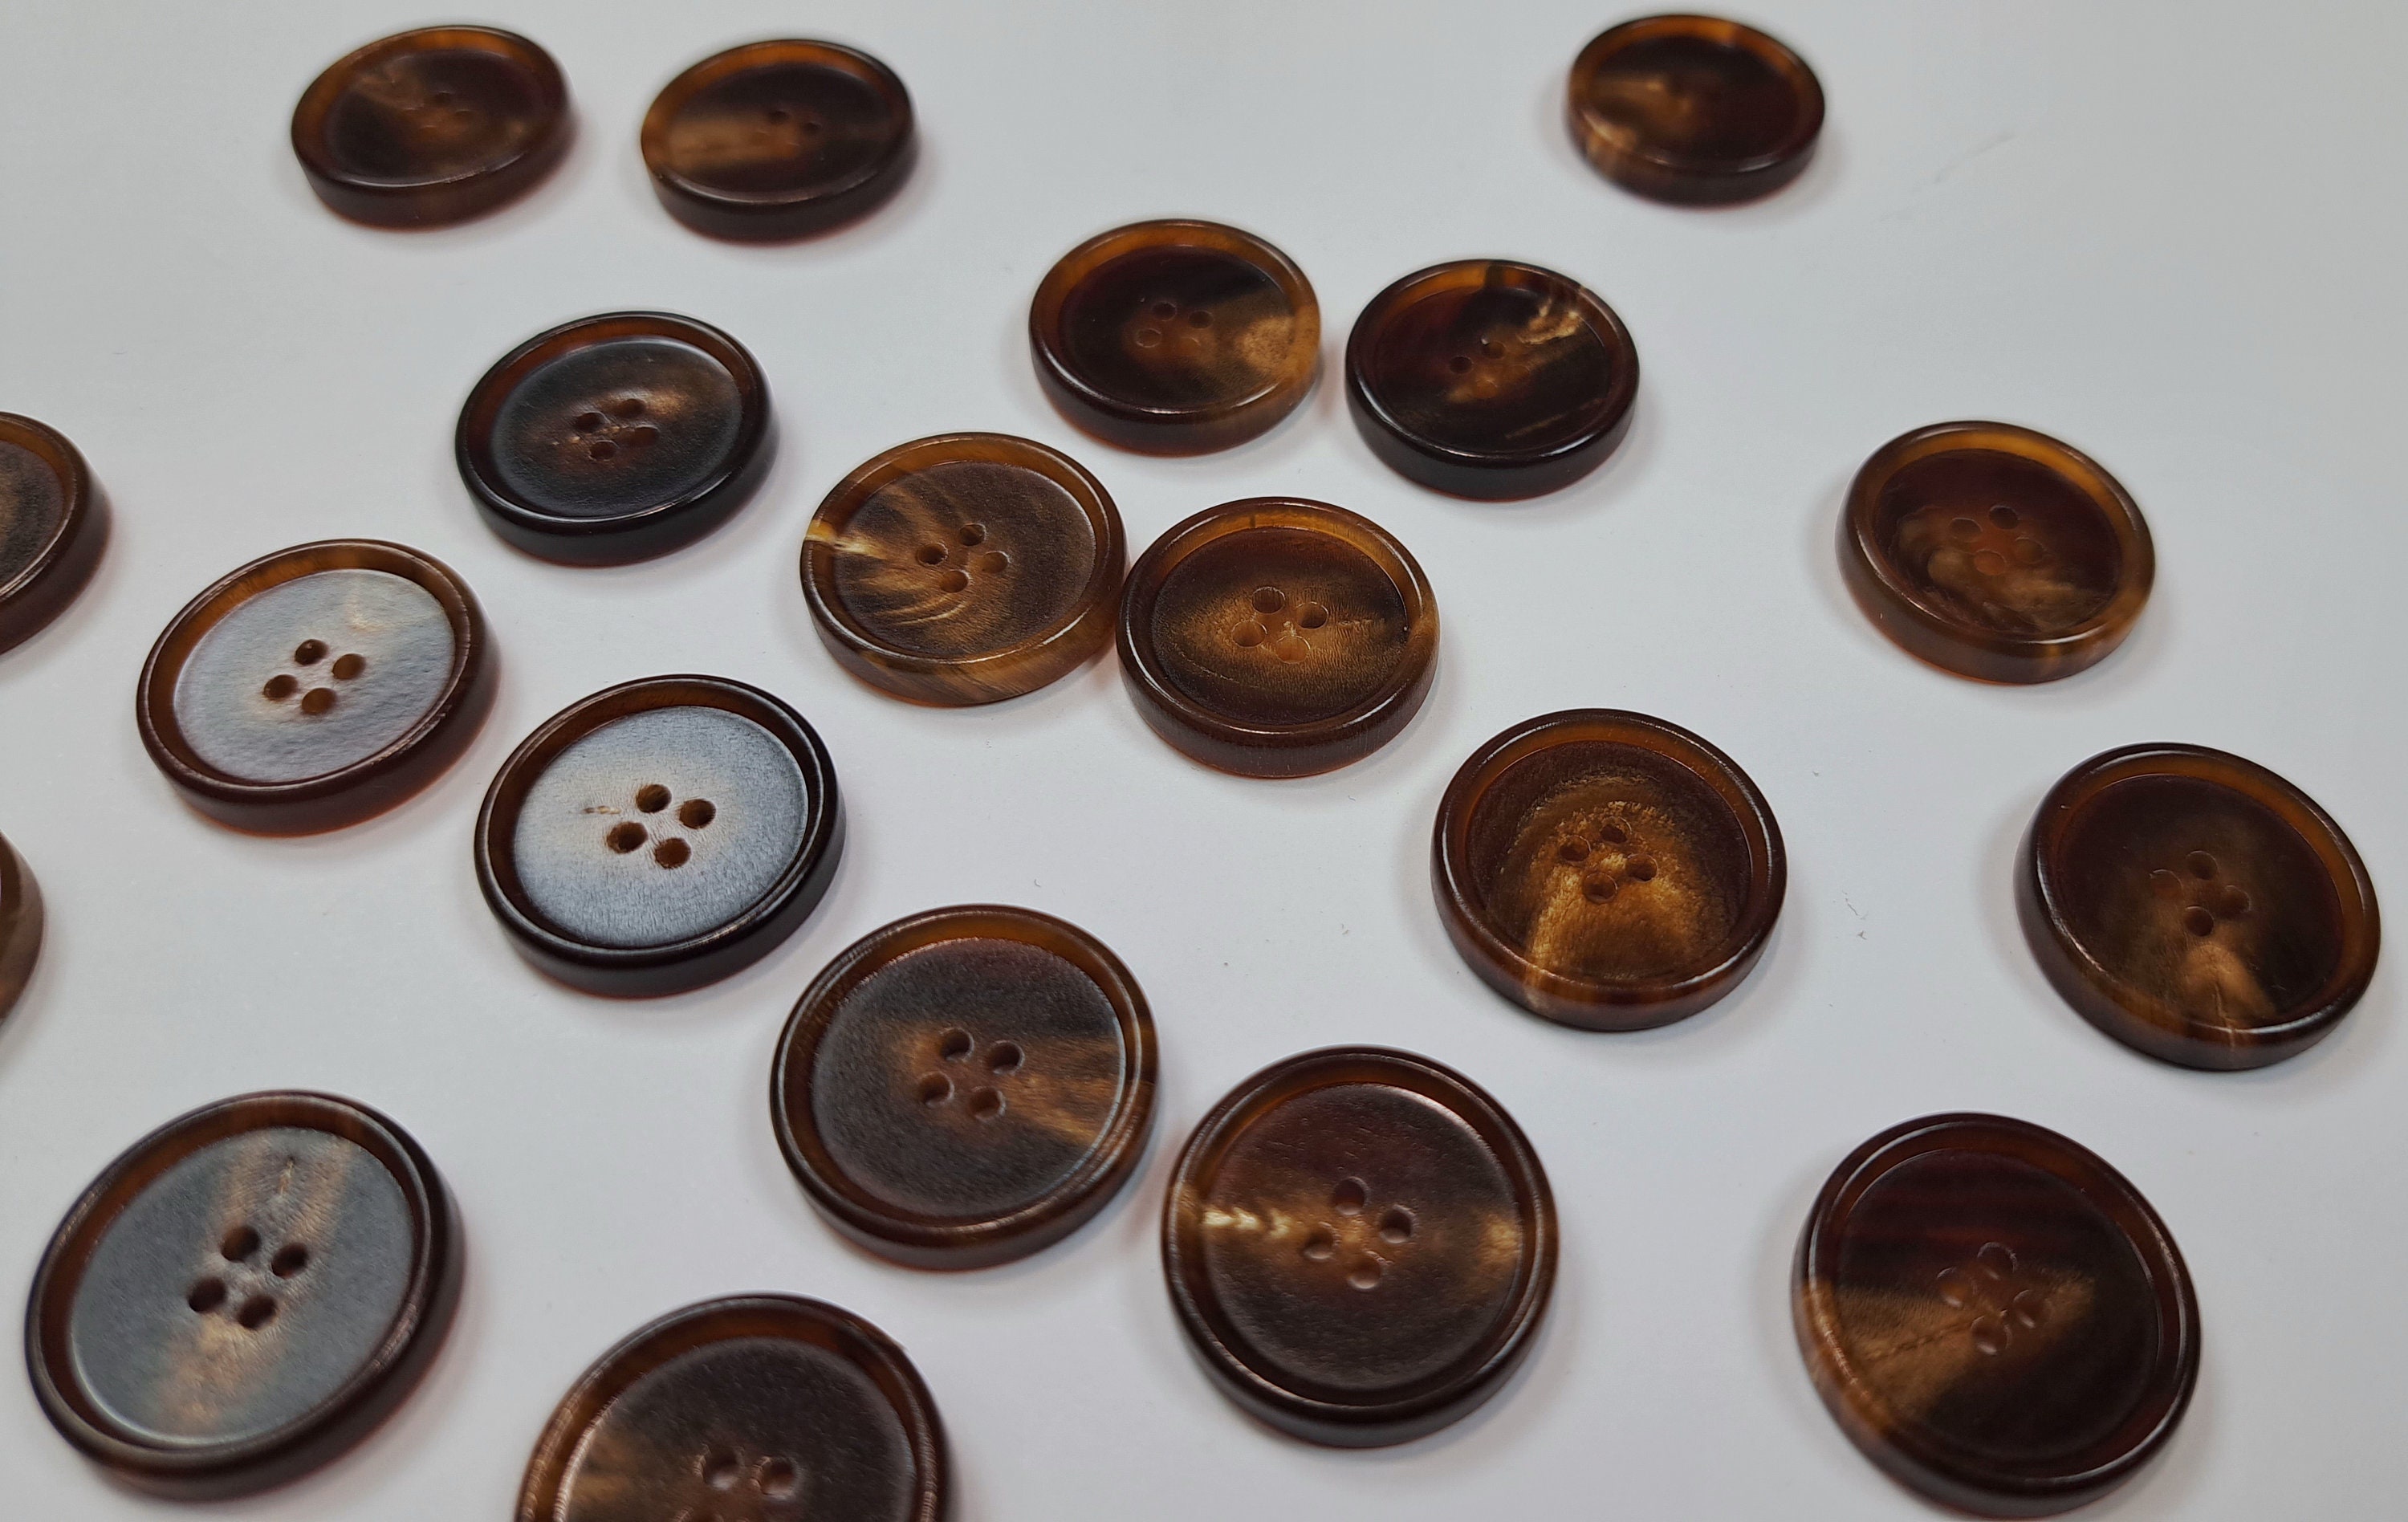 Camel Brown Italian Leather Button Imitation 1-1/8 (28mm) 44L Vintage  Shank Buttons #629